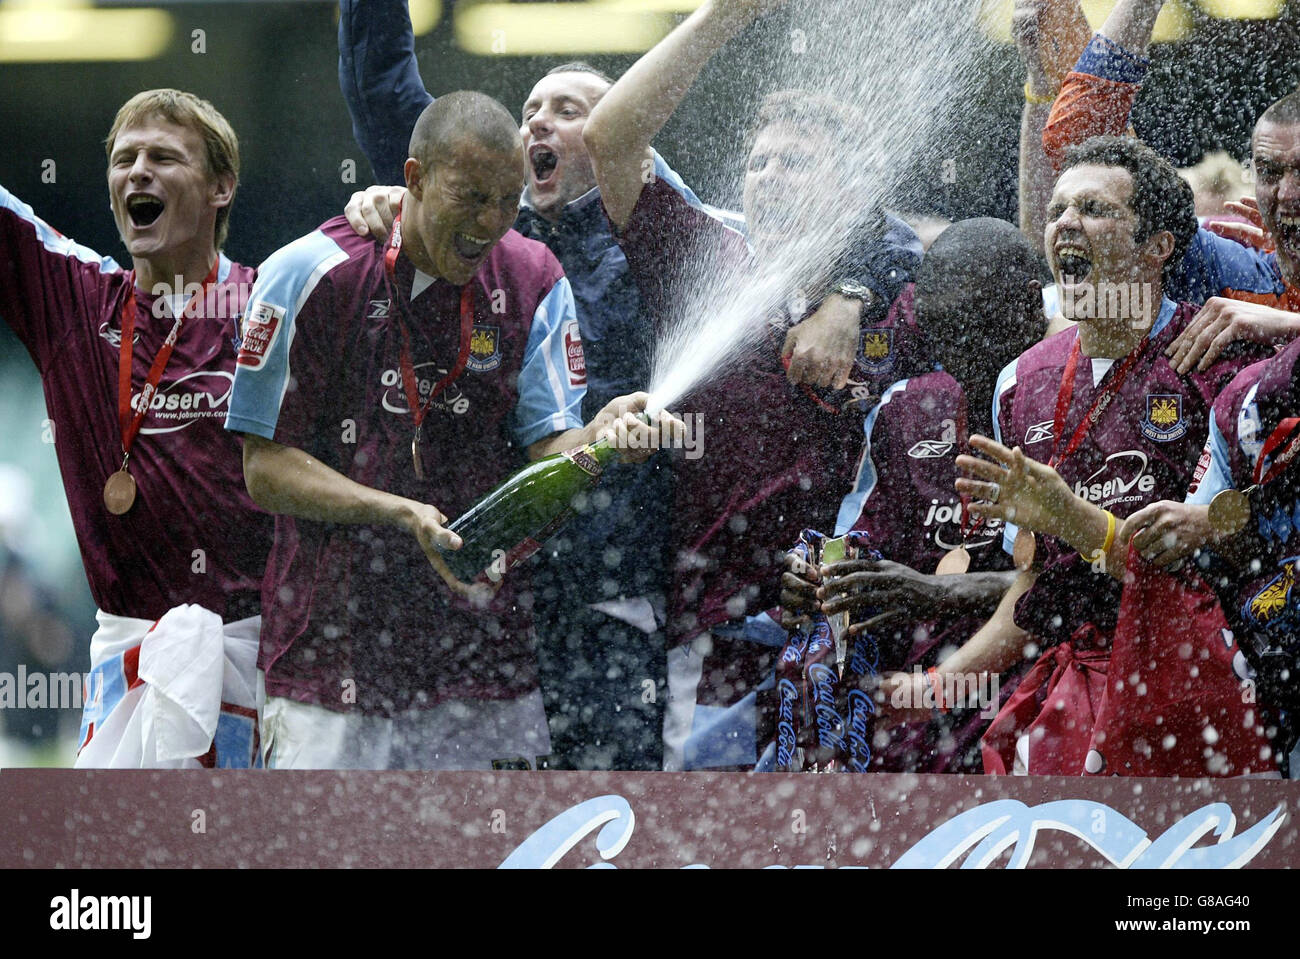 West Ham United's Bobby Zamora (2nd from left) sprays the champagne as he celebrates with his team-mates after winning the Coca-Cola Championship play-off final. Stock Photo